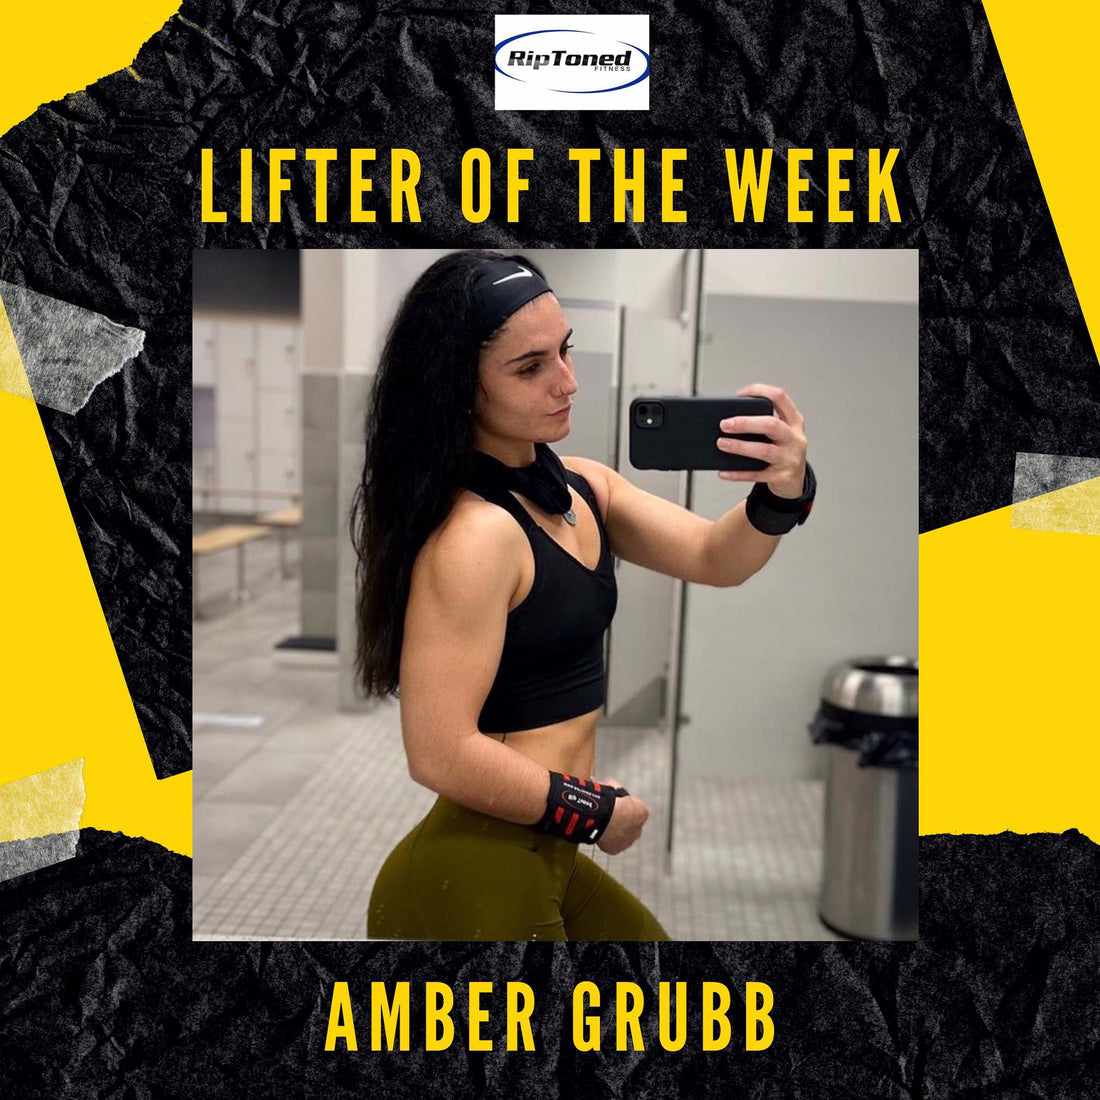 Lifter of the Week - Amber Grubb - Rip Toned